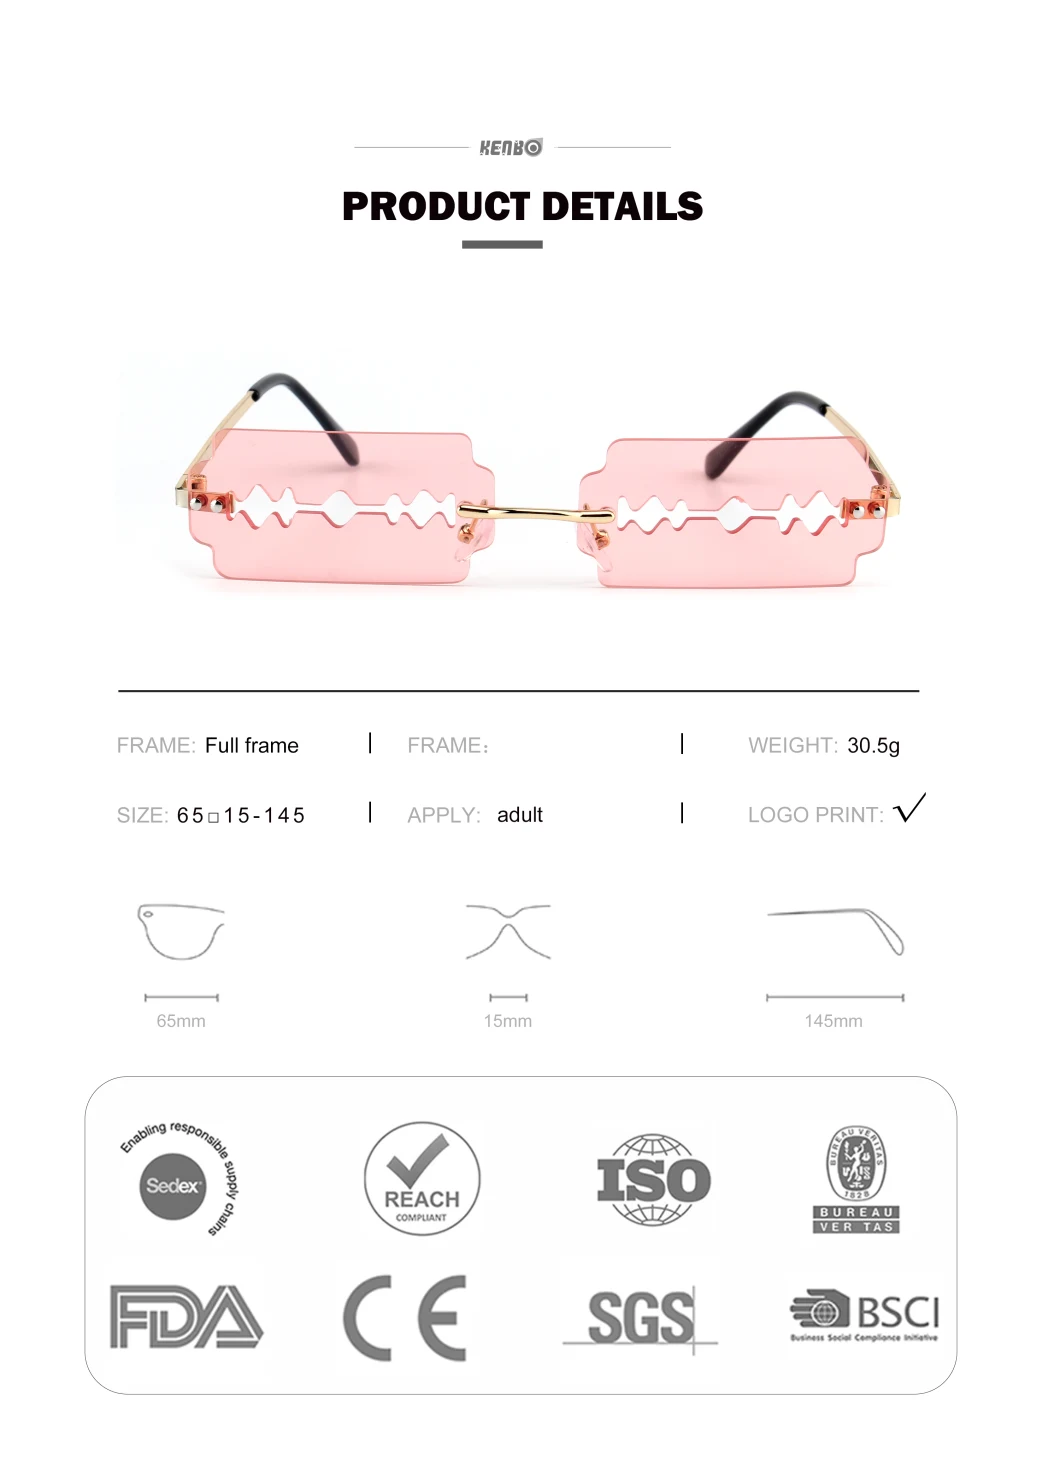 Kenbo Eyewear 2020 New Arrivals Newest Fashion Blade Modeling Cool Rimless Cut Sunglasses Trend Dazzle Color Sunglasses